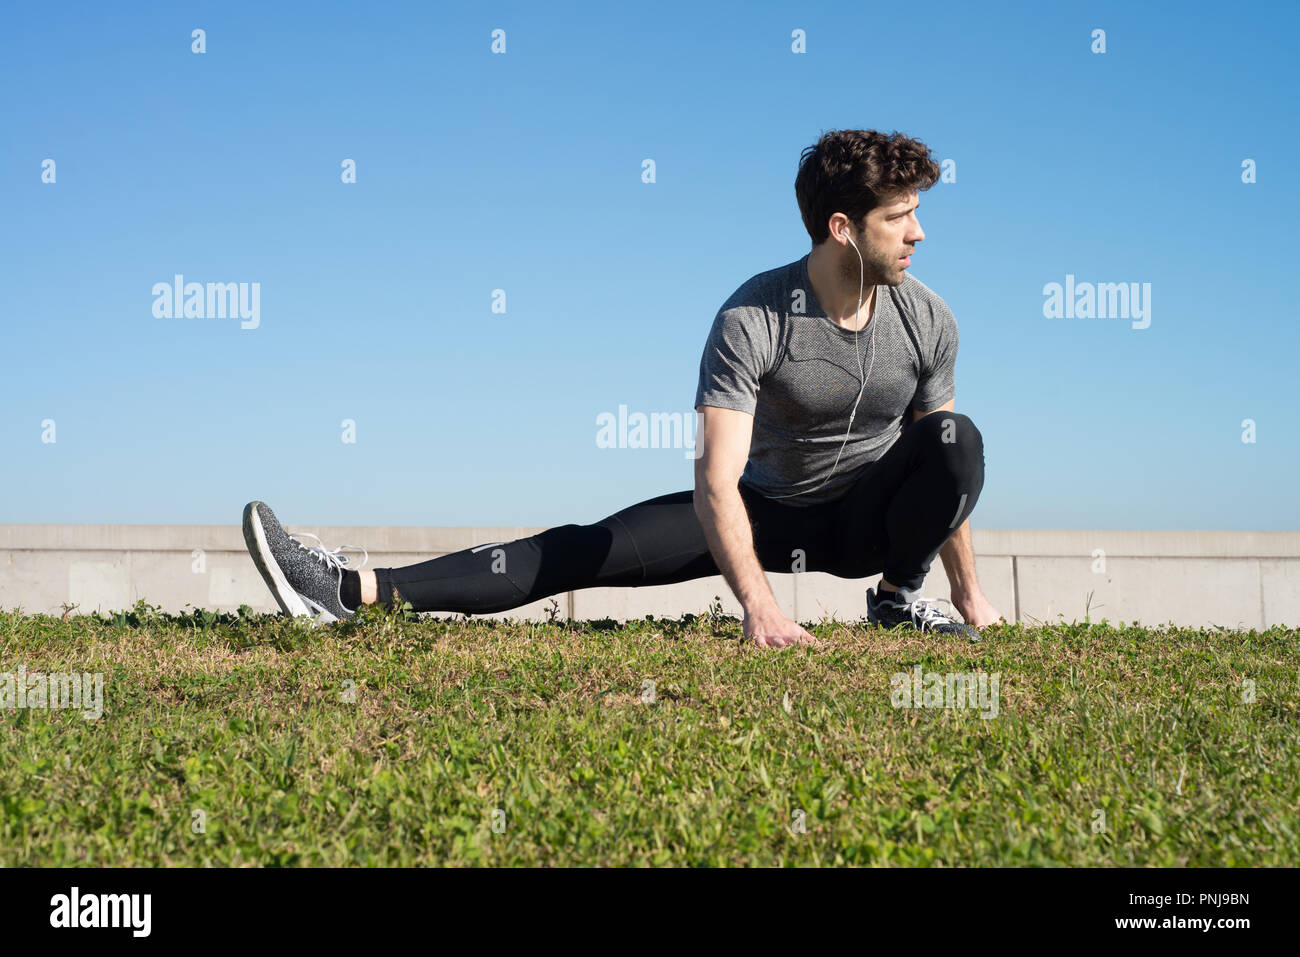 man stretches leg in the ground in the grass Stock Photo